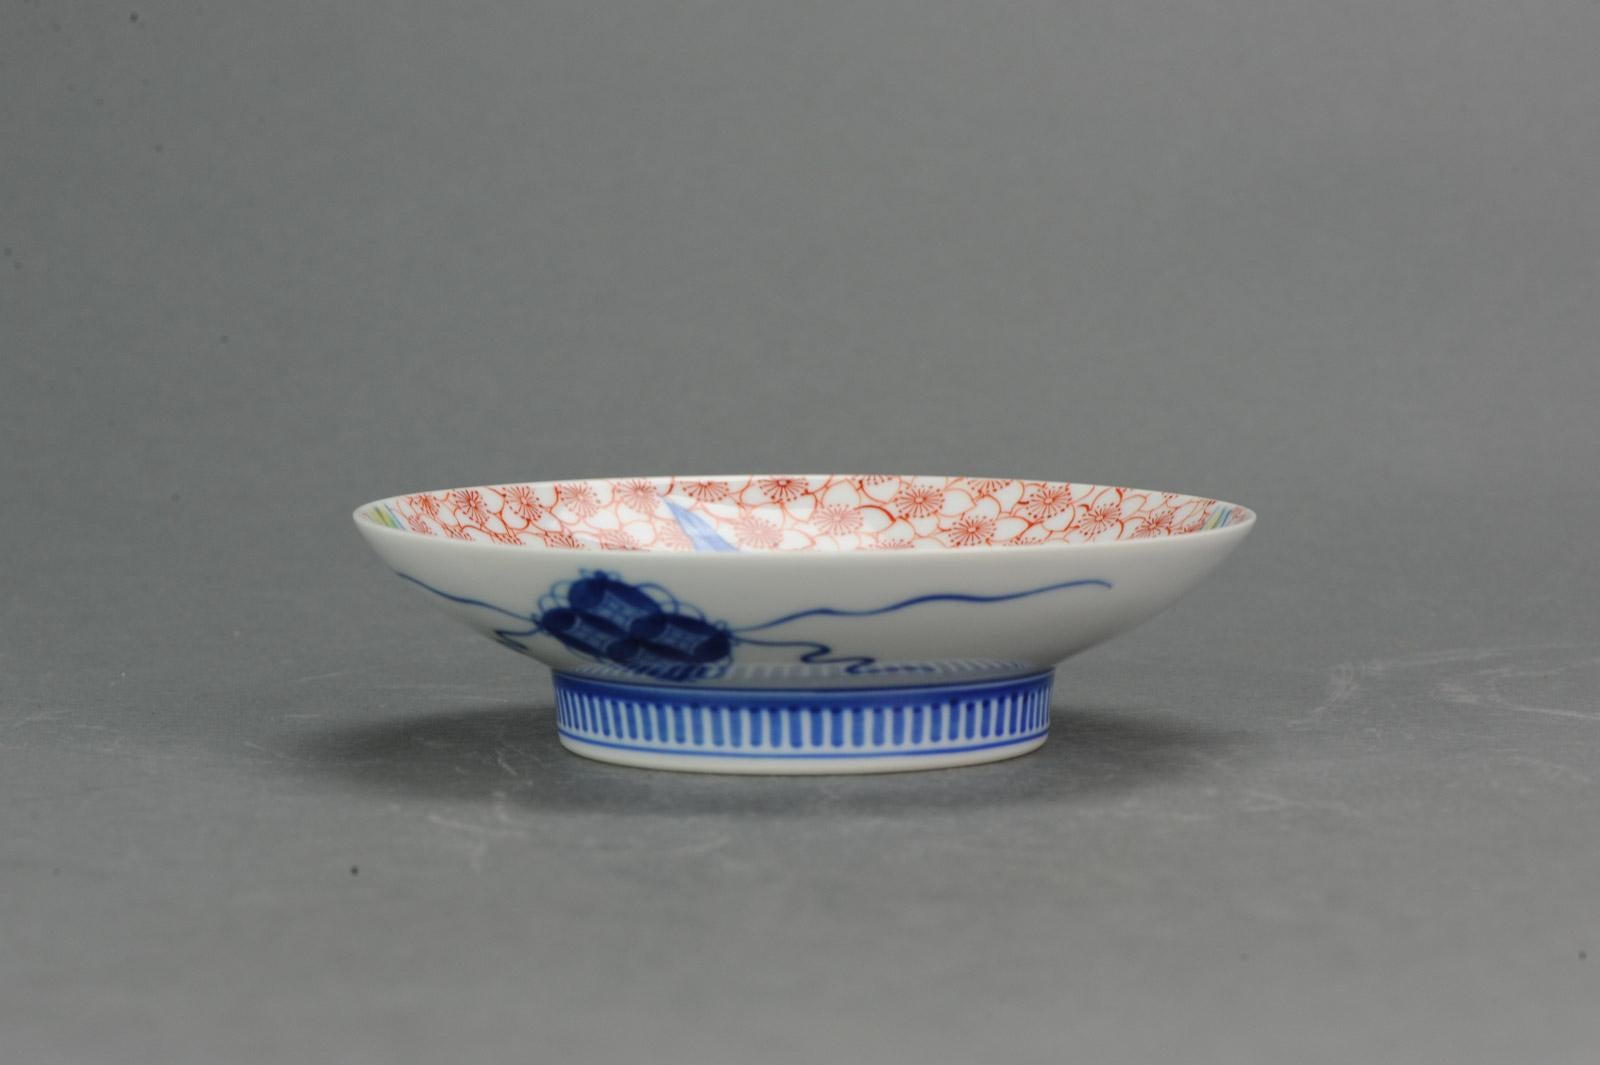 A very nice bowl footed bowl in Nabeshima style

Additional information:
Material: Porcelain & Pottery
Region of Origin: Japan
Period: 20th Century
Condition: Overall Condition Close to Perfect -1 very small frit.
Dimension: Ø 15.3 x 4 H cm